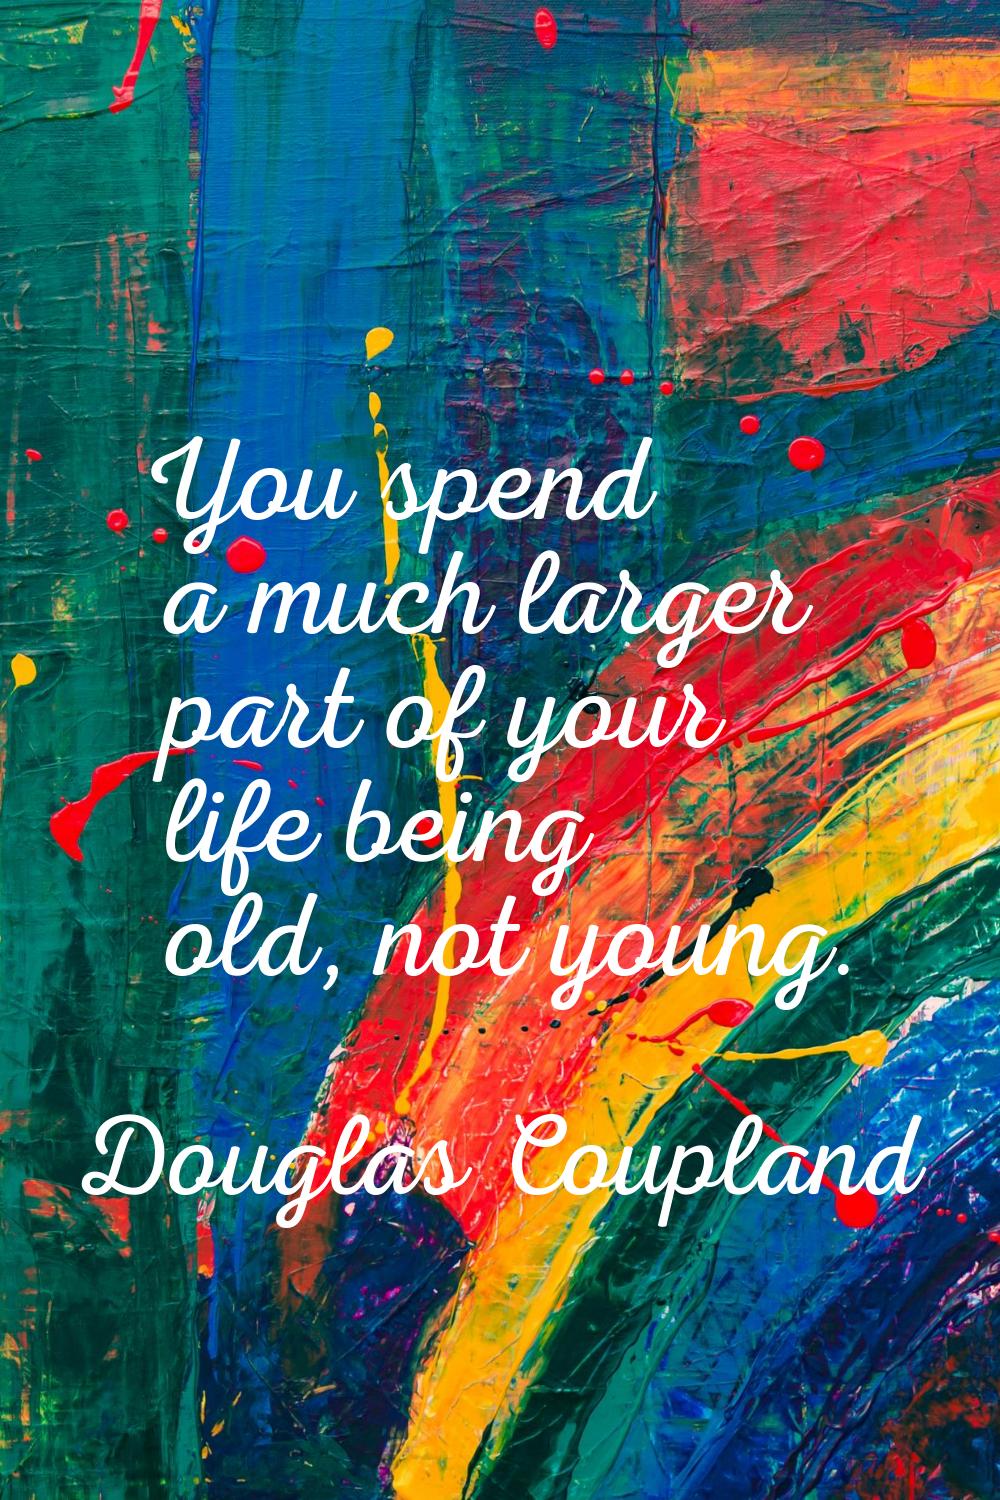 You spend a much larger part of your life being old, not young.